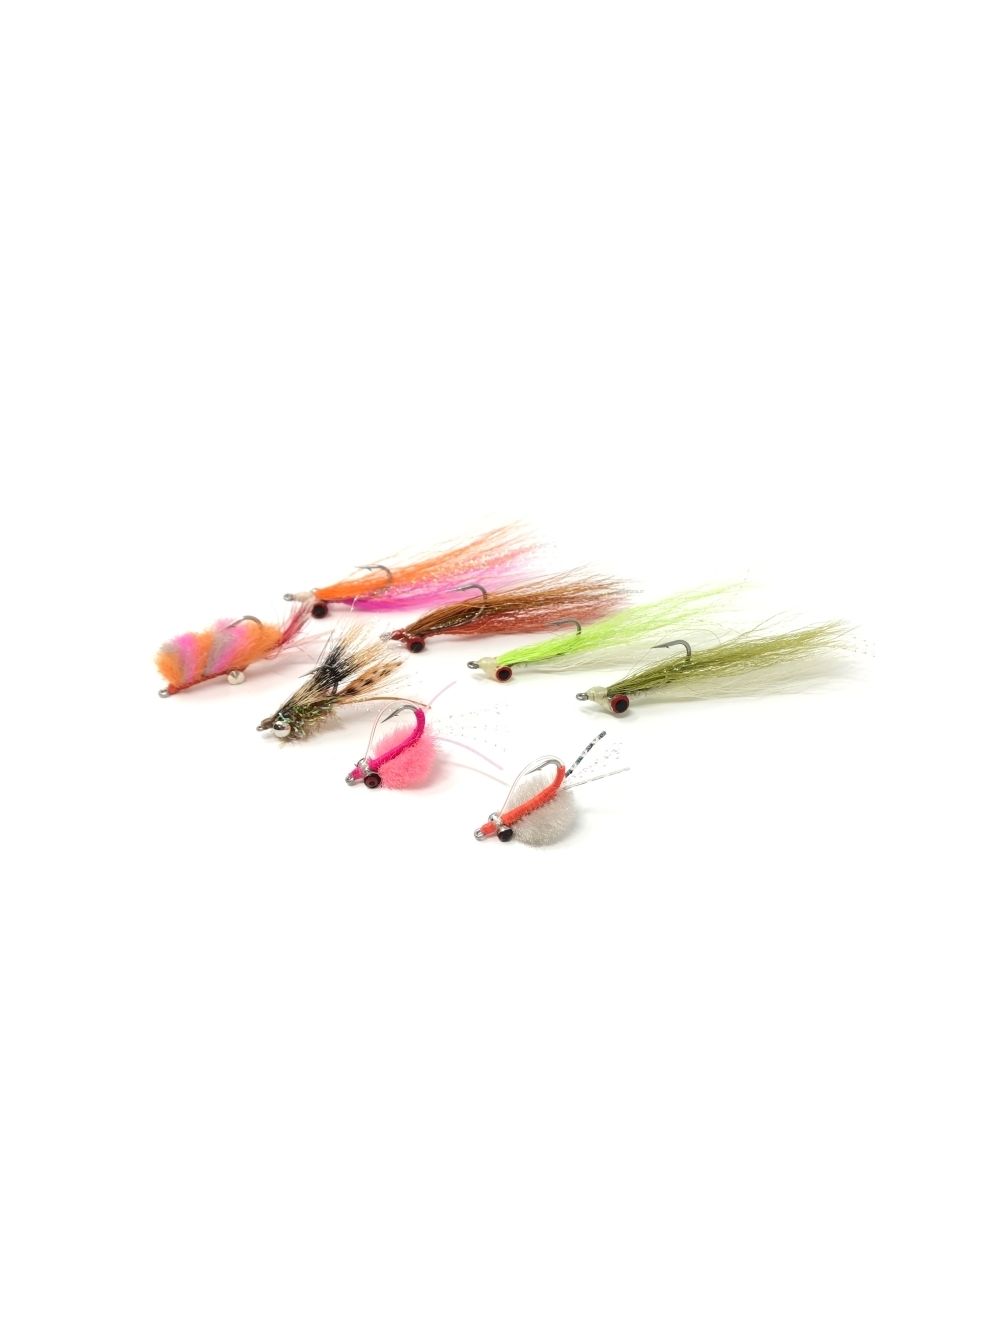 Saltwater Fly Assortment SoCal TheFlyStop